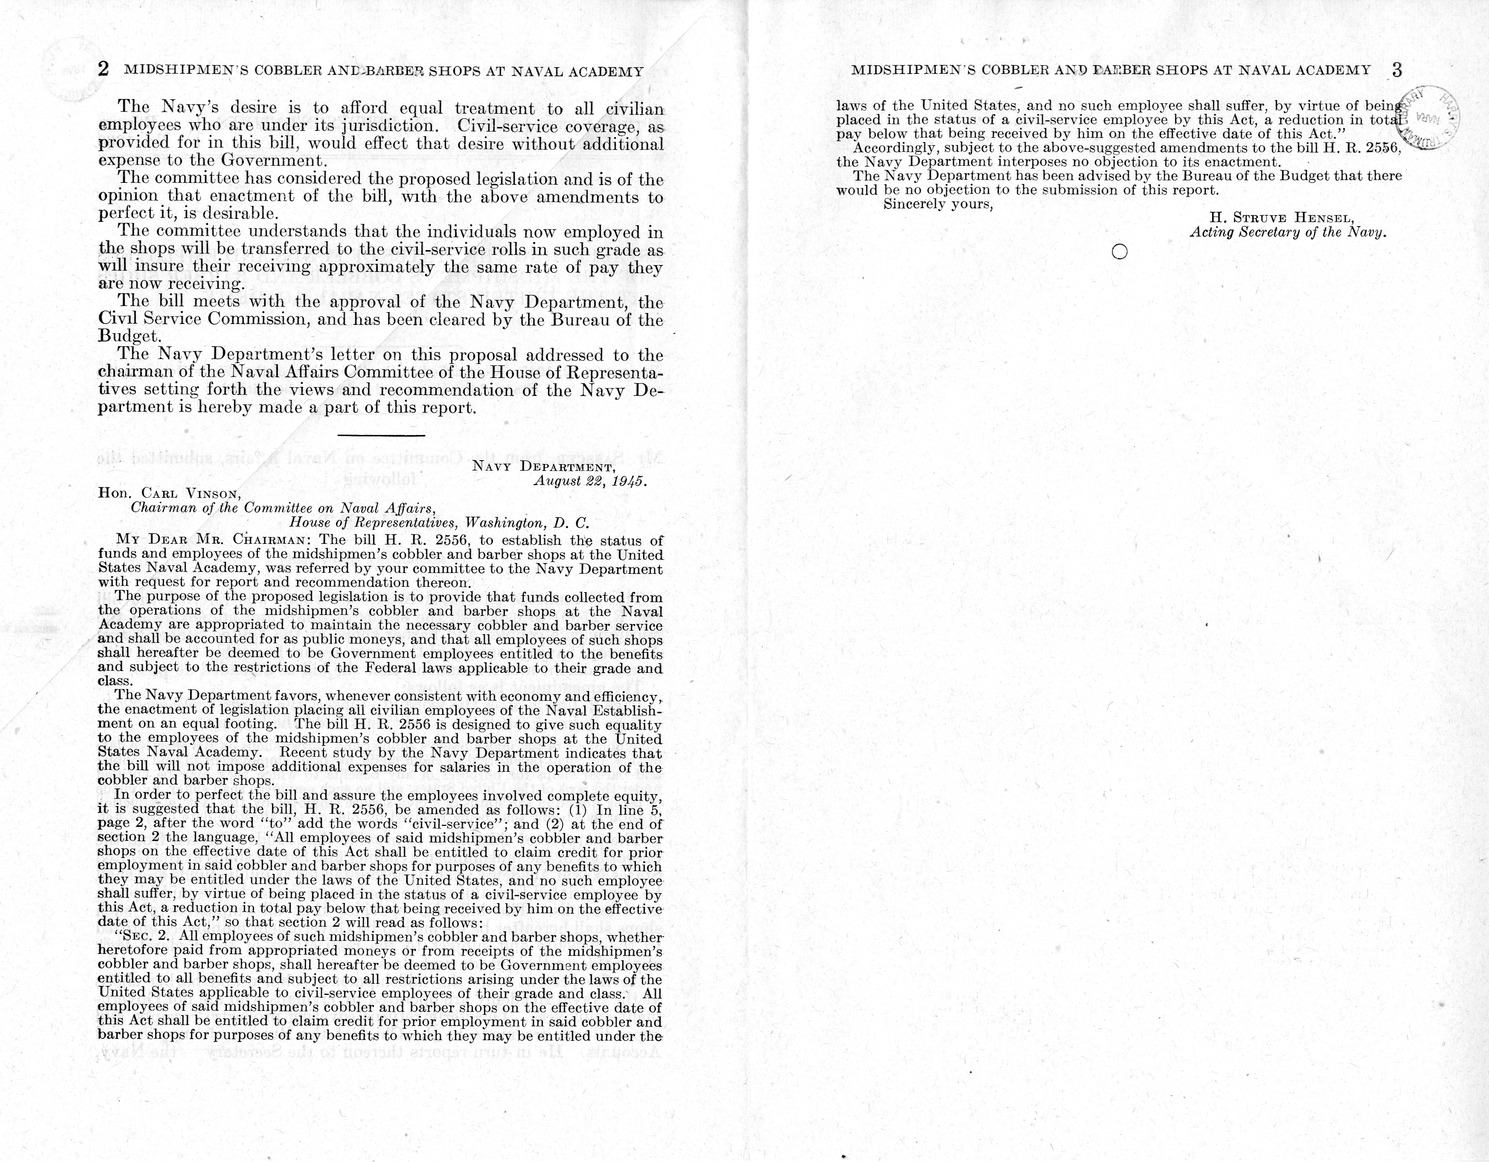 Memorandum from Frederick J. Bailey to M. C. Latta, H.R. 2556, To Establish the Status of Funds and Employees of the Midshipmen's Cobbler and Barber Shops at the United States Naval Academy, with Attachments